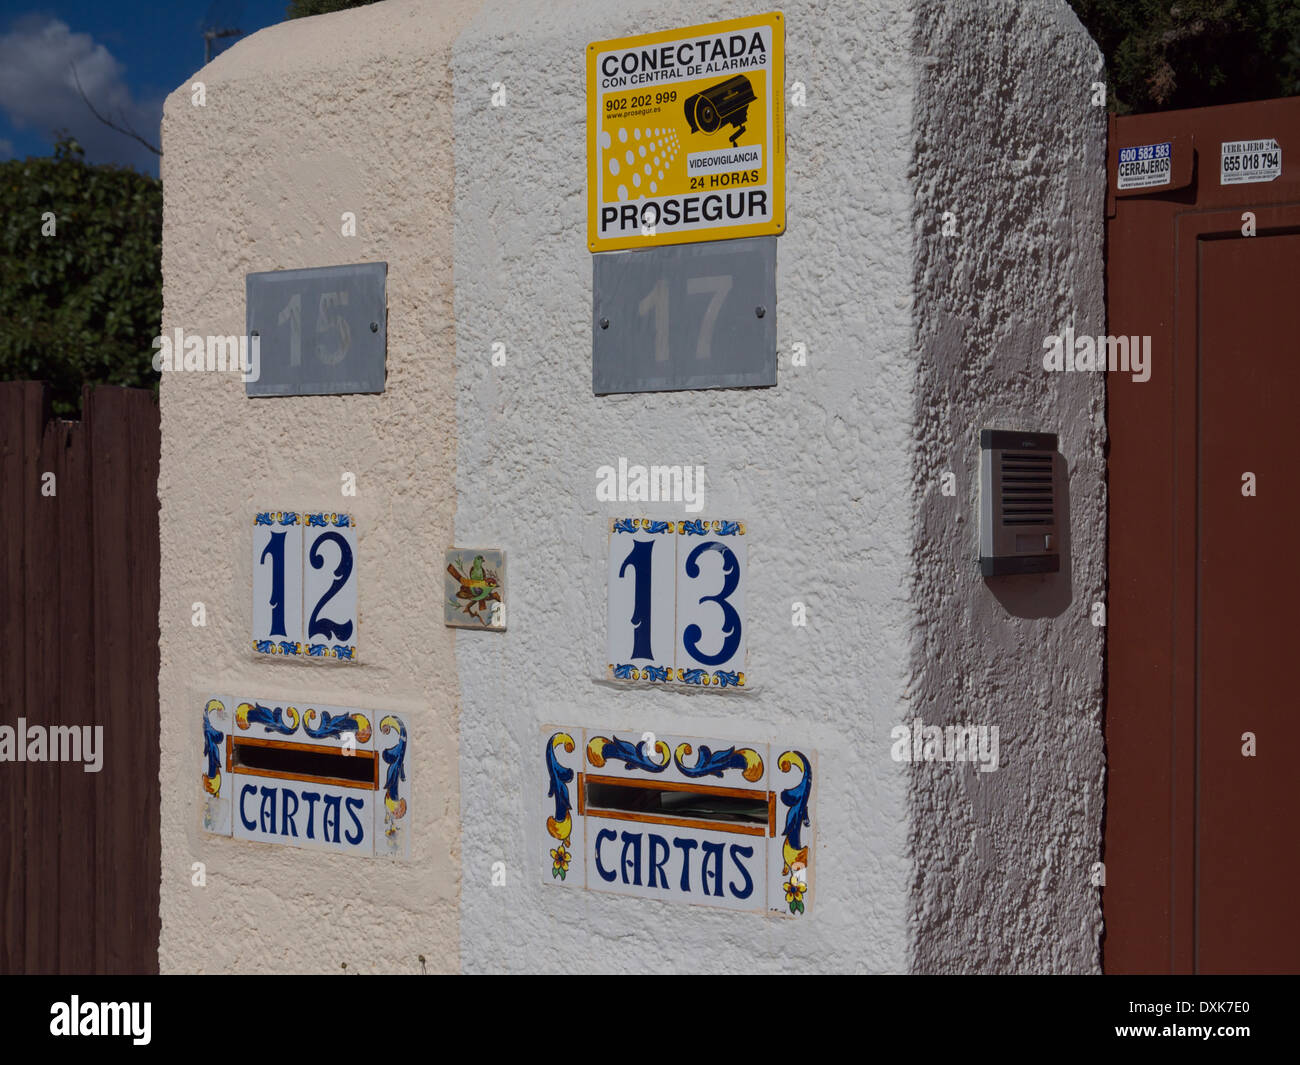 House numbers with letterboxes and the word Cartas which means Letters. Stock Photo